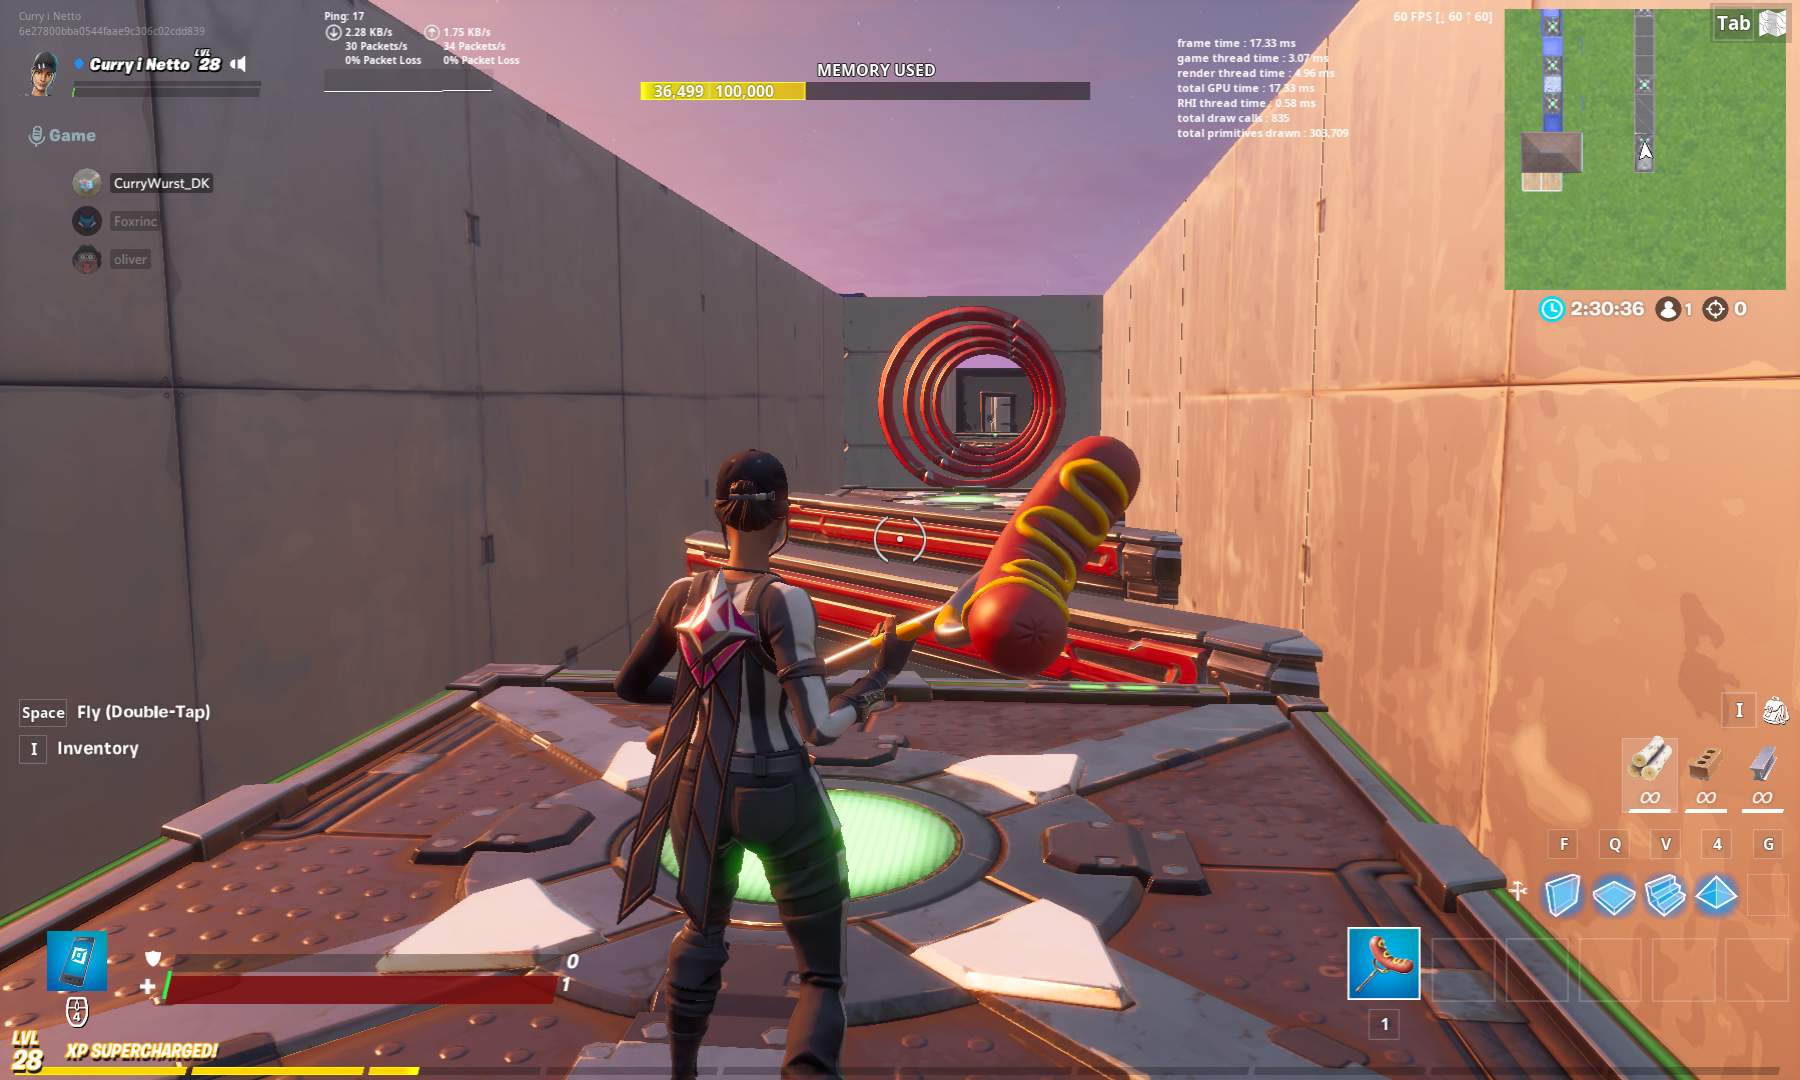 JEKYLL´S PARKOUR 2.0 [ jekyll_h_y_d_e ] – Fortnite Creative Map Code